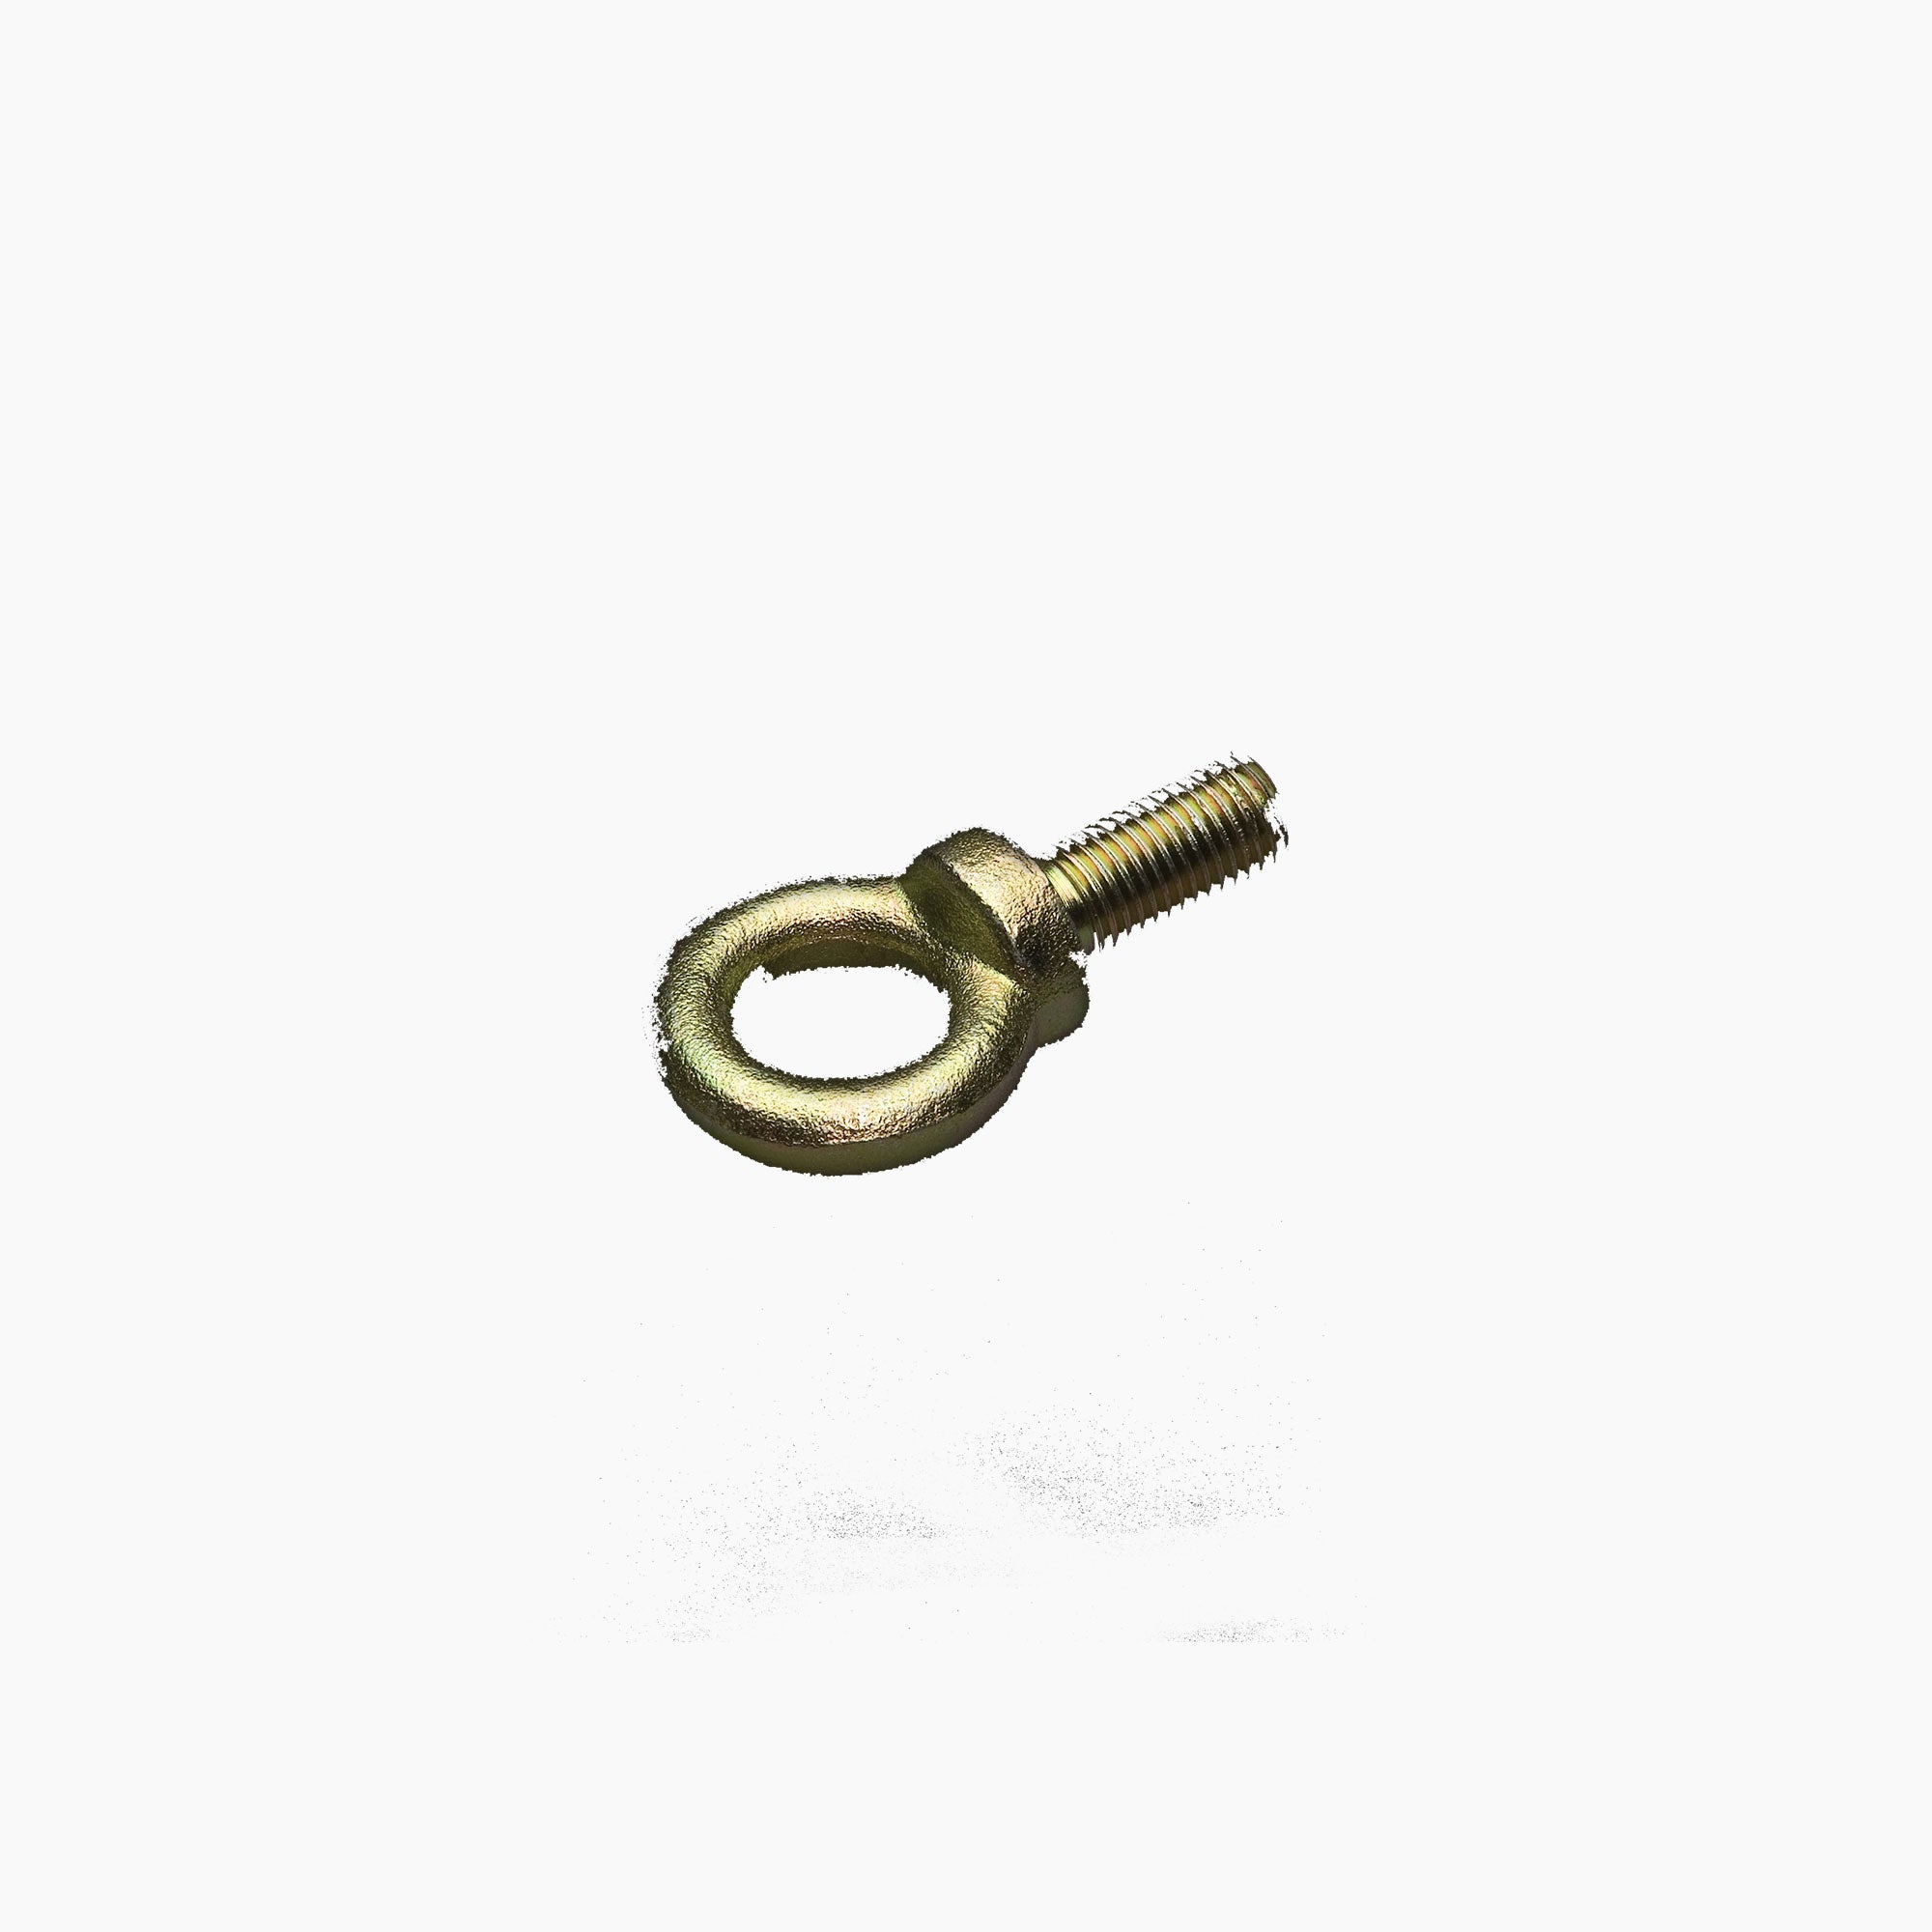 OMP | Harness Eyebolt-Harness Accessory-OMP-gpx-store